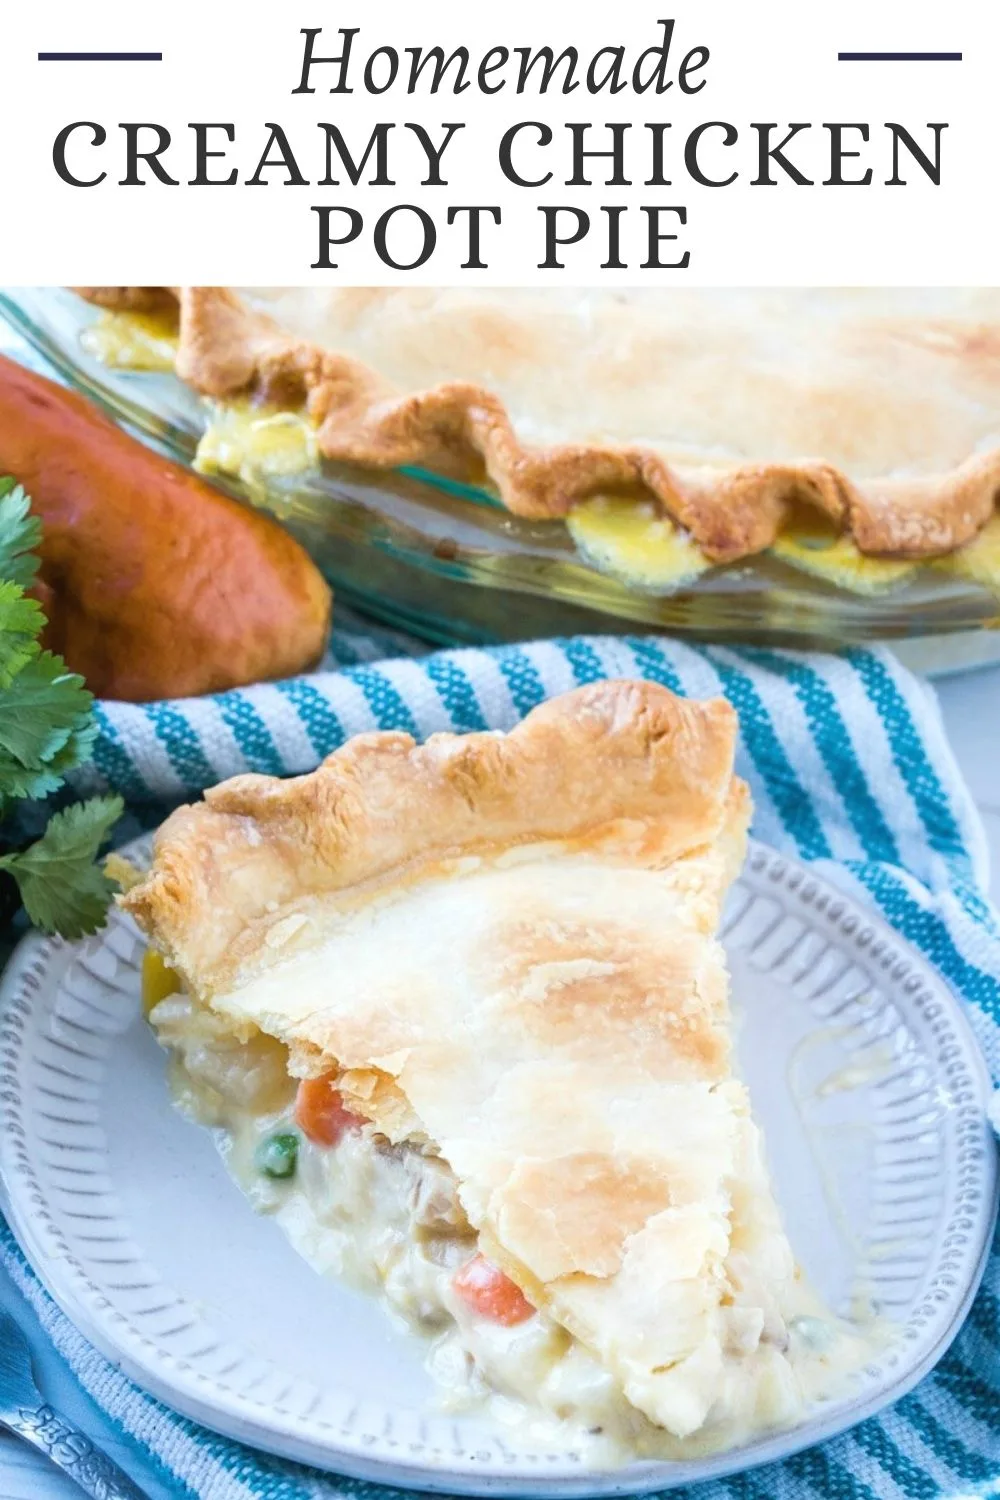 This homemade chicken pot pie recipe is one of our family favorites. The creamy chicken and vegetable filling is perfect in the buttery crust. It is a great way to get a warm meal on the table.